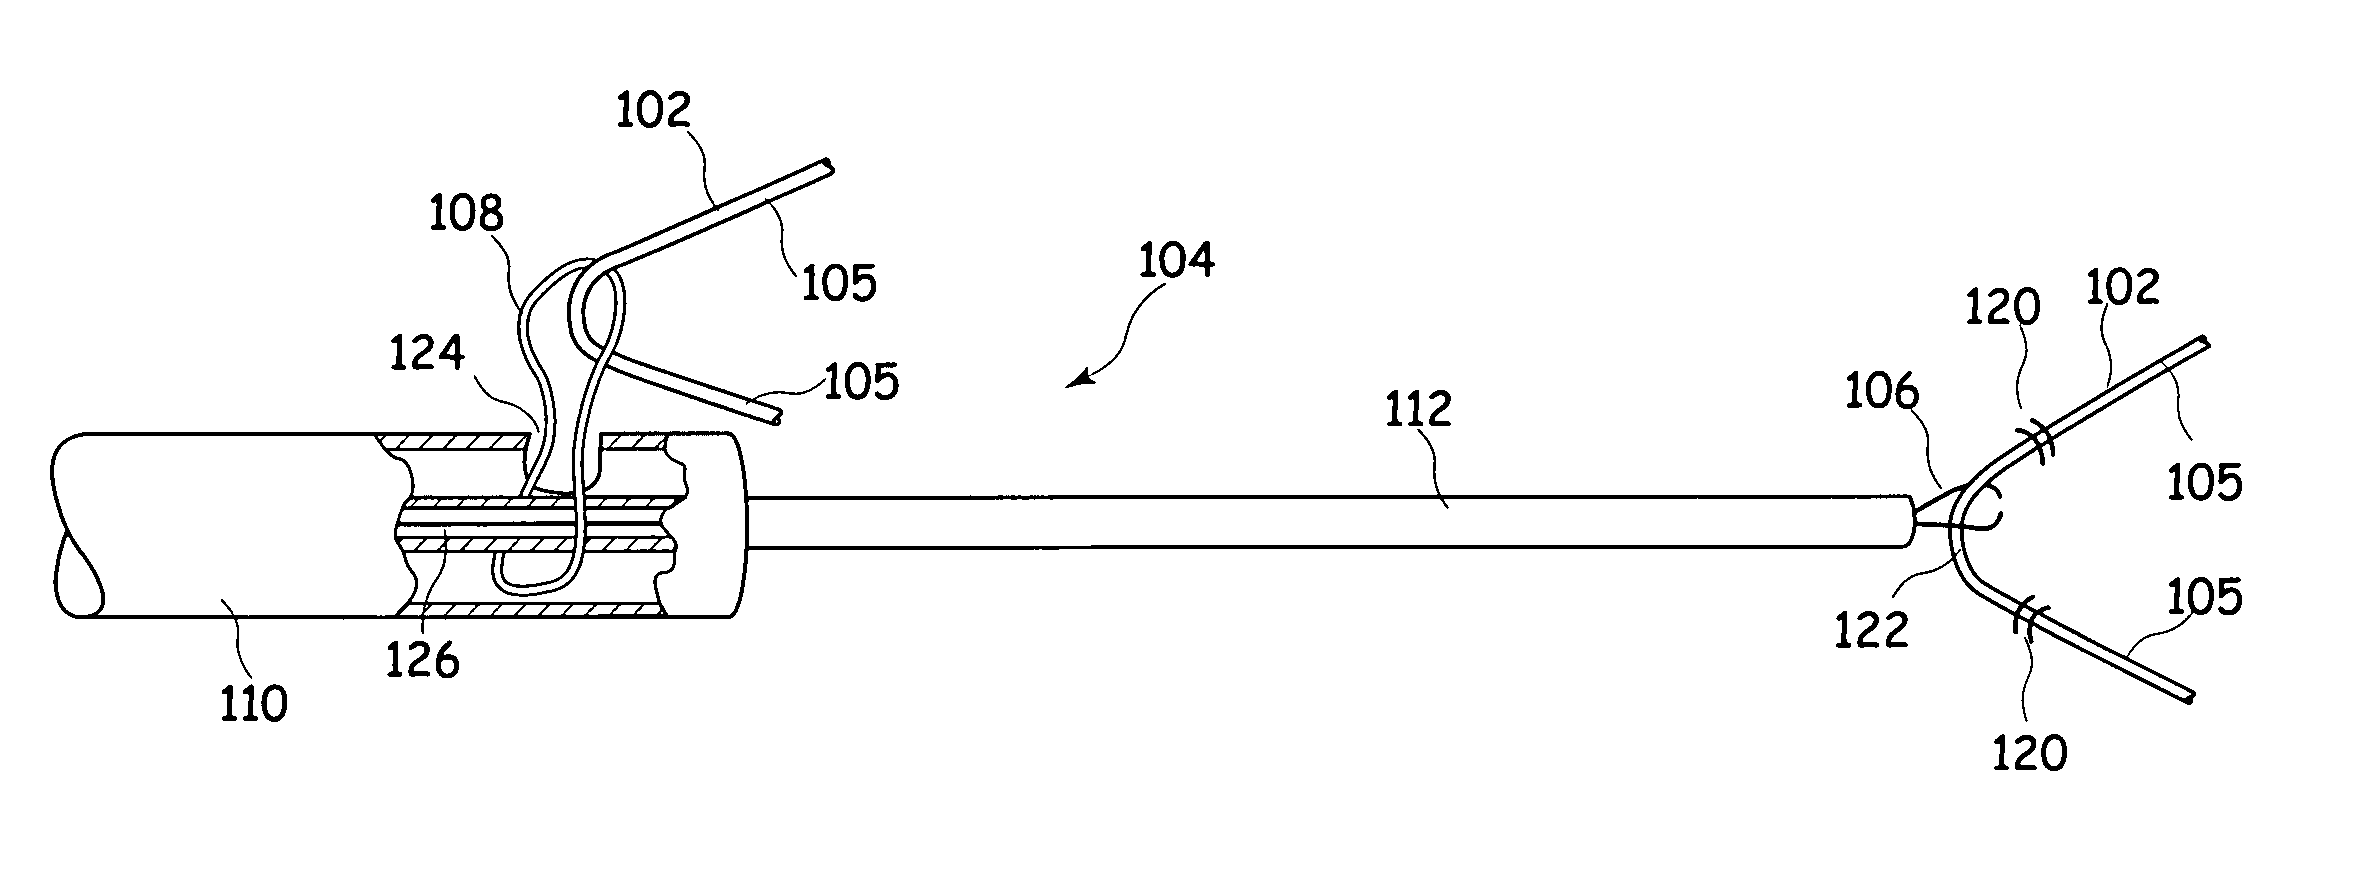 Apparatus for and method of fitting a stent-graft or similar device